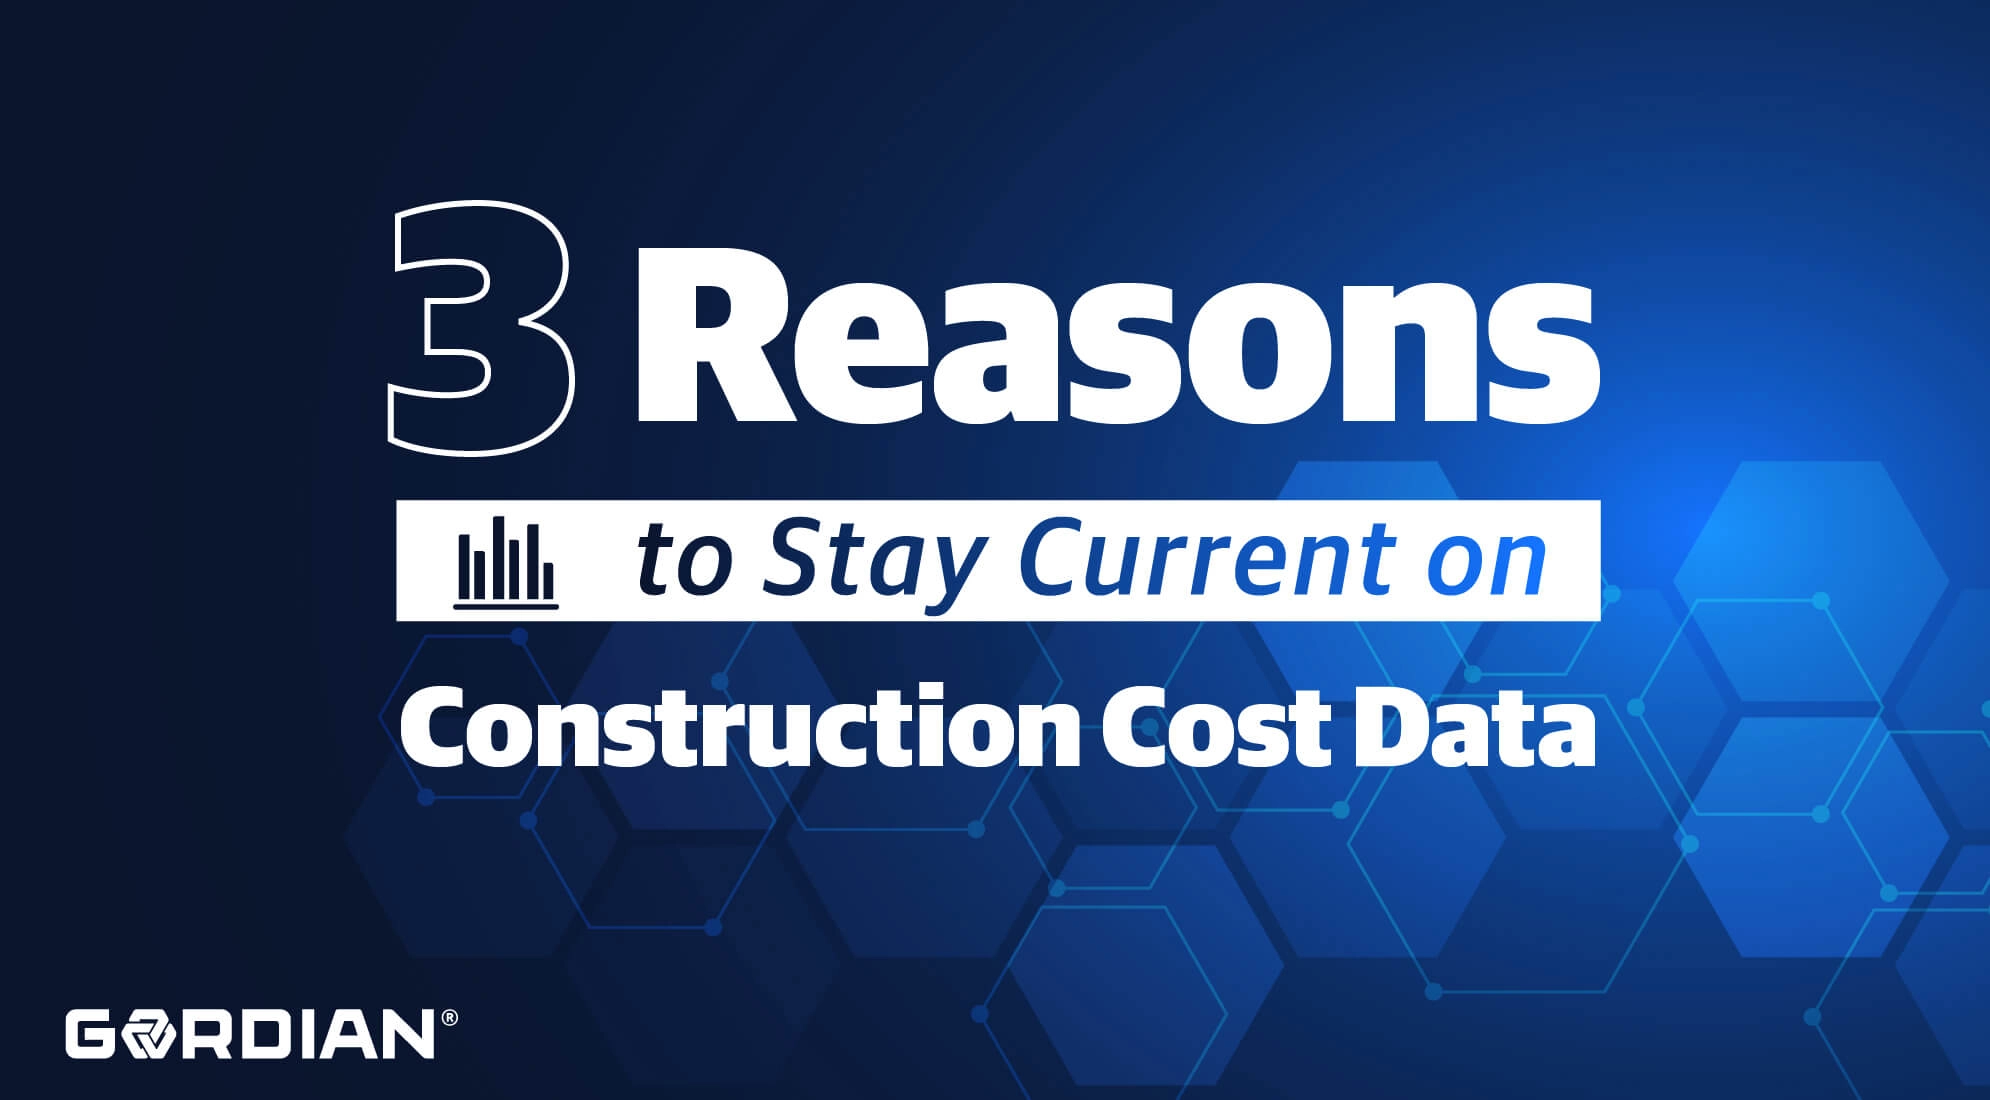 3 Reasons to Stay Current on Construction Cost Data 2